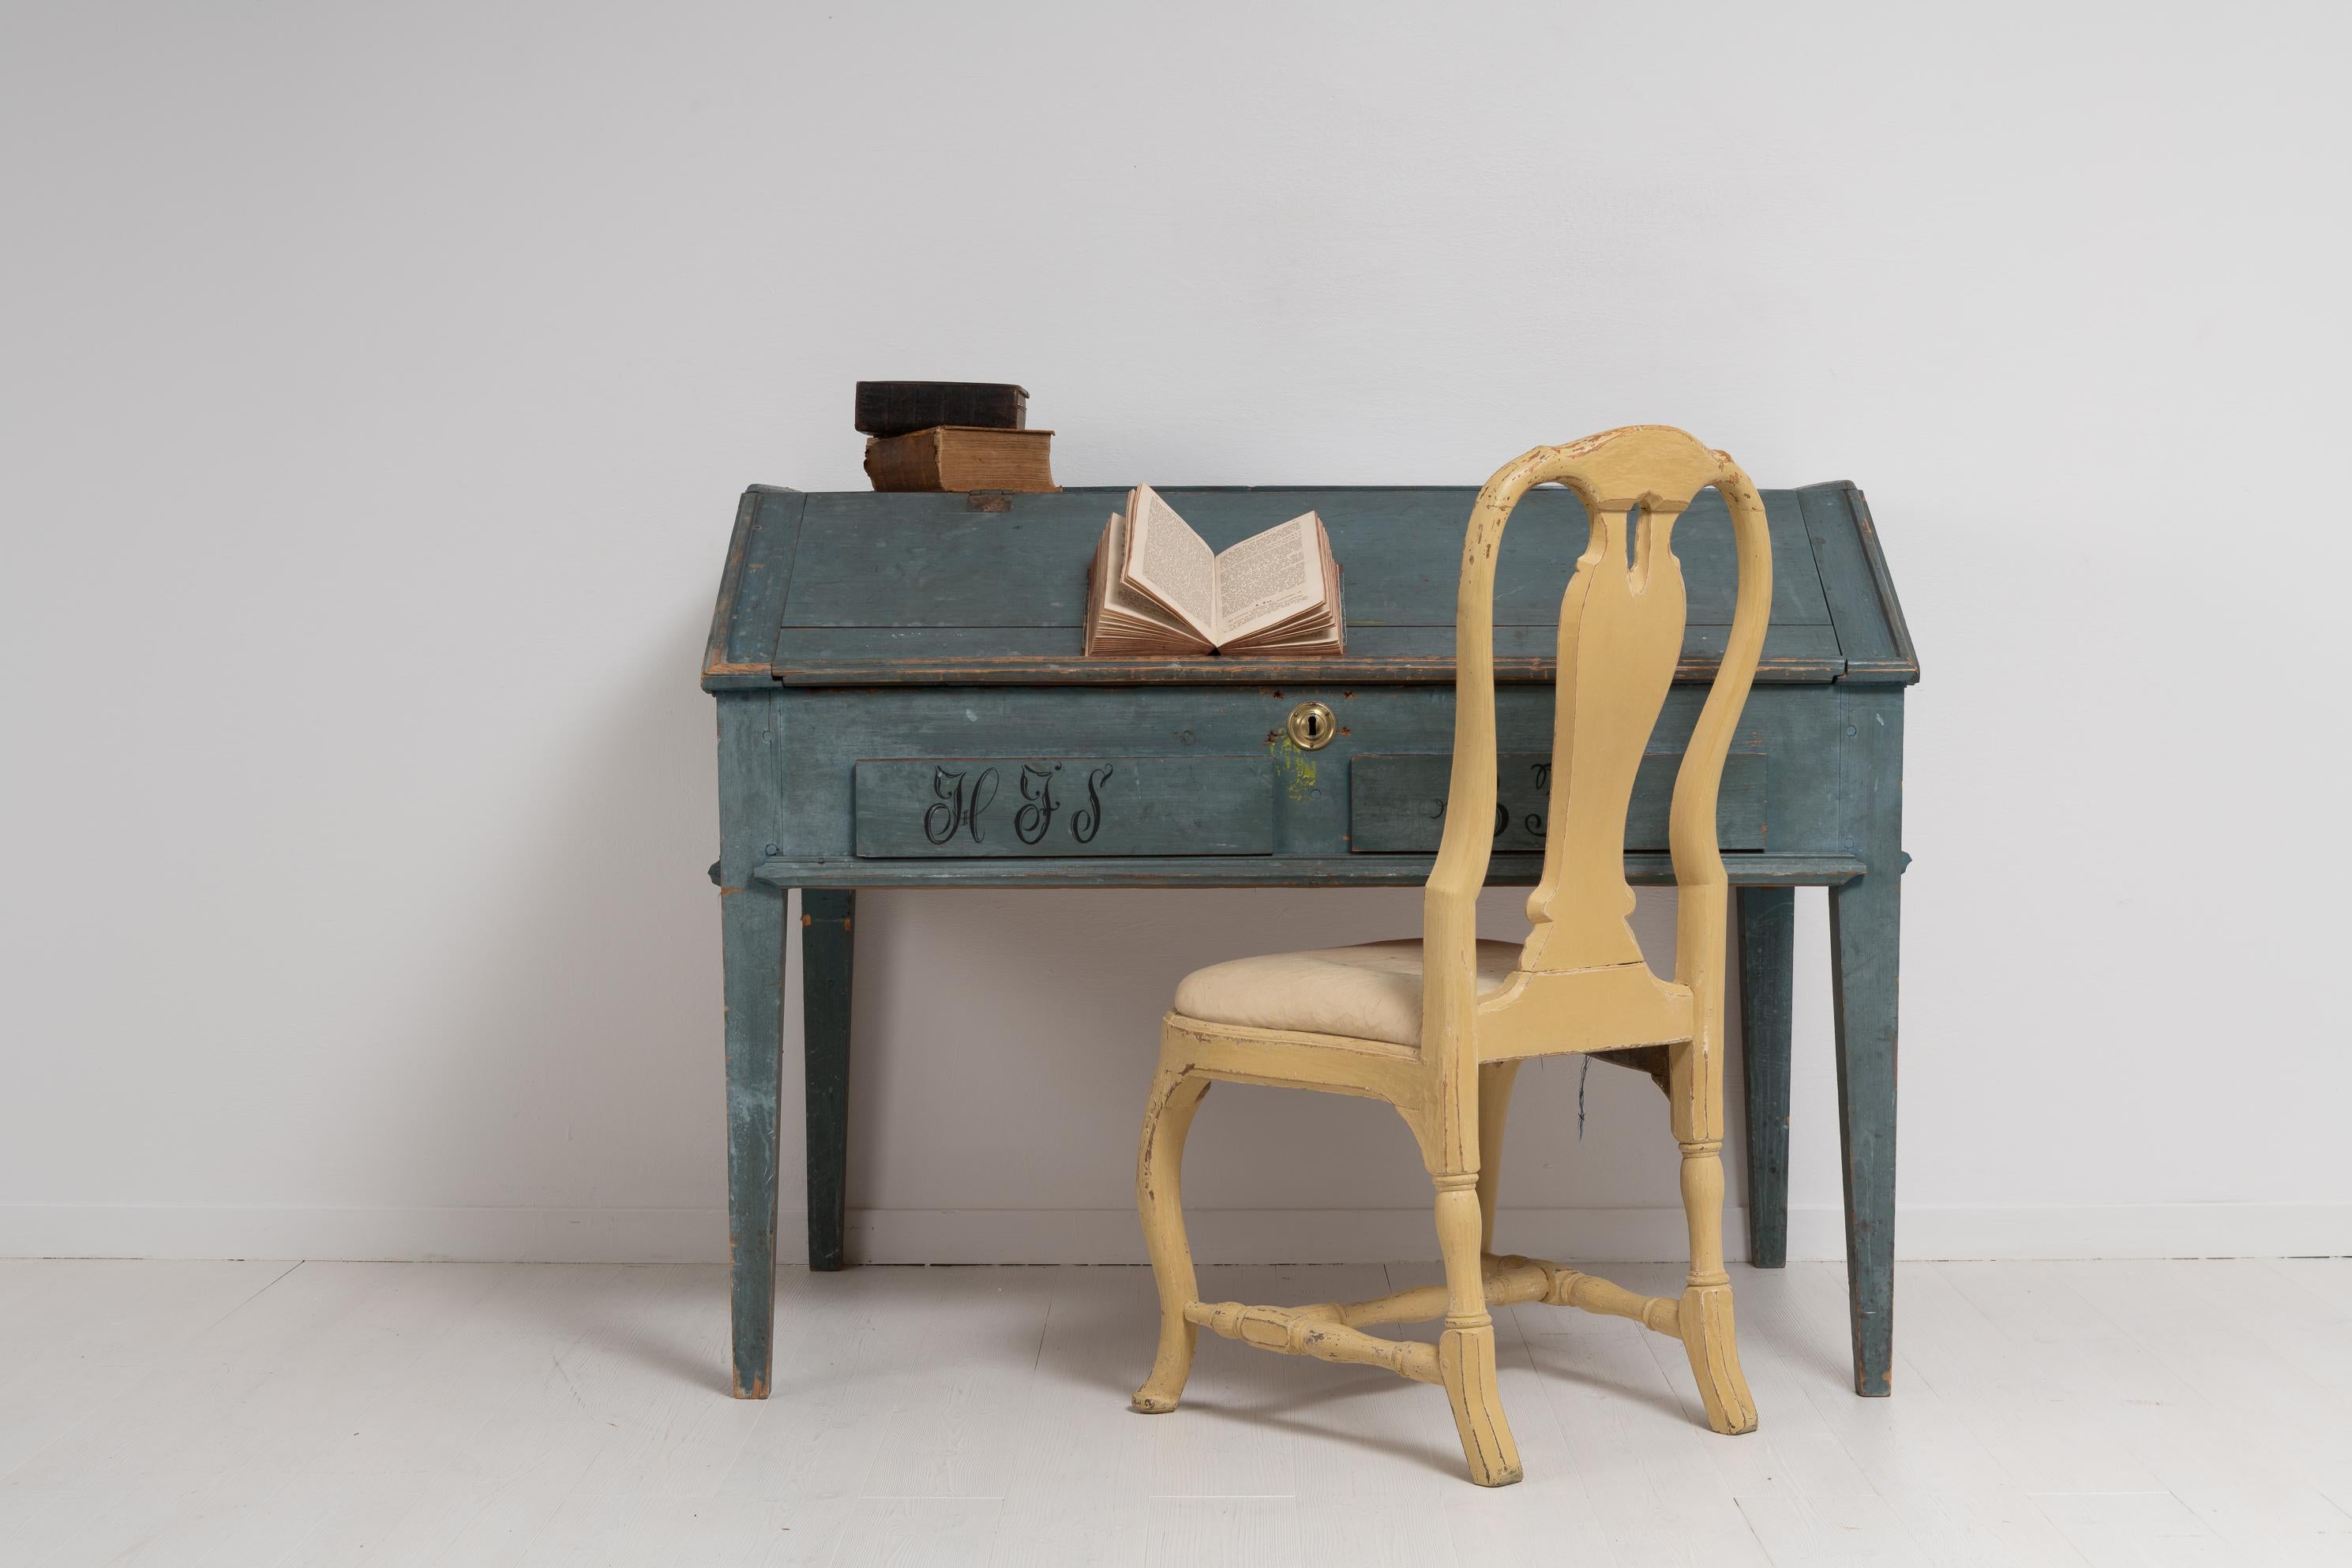 Antique genuine pine writing desk from Sweden with blue paint. The table is in untouched original condition with the original blue toned paint. Dated 1850 and monogrammed in black. The desk has an interior with multiple small drawers and shelves.